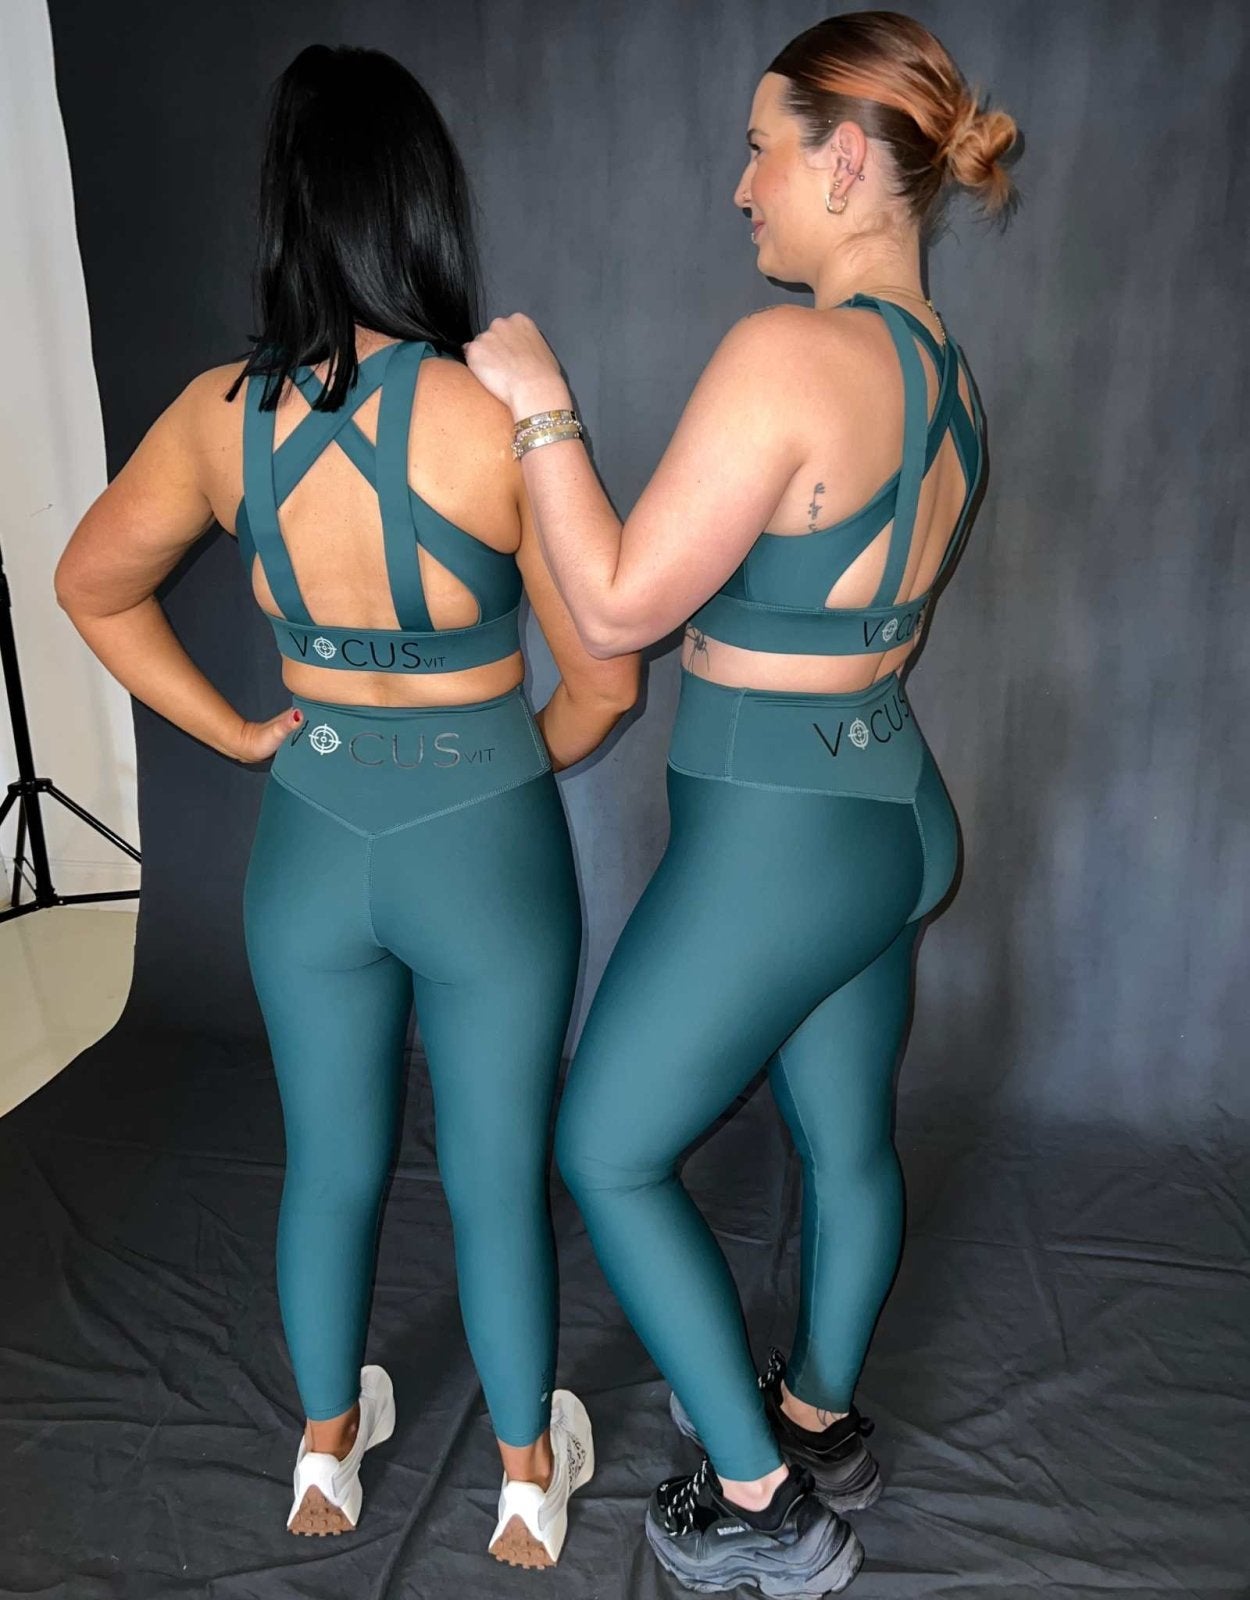 2 girls standing and modelling. One is resting her arm on the other girls shoulder. both are wearing green activewear from vocus vit. They have leggings and a cross back sports bra on. Vocus vit is a sustainable women's activewear brand that uses recycled materials and ethical manufacturing. Based in Northern Ireland. Shipping worldwide.Sizes XS (8) TO XXL (18).